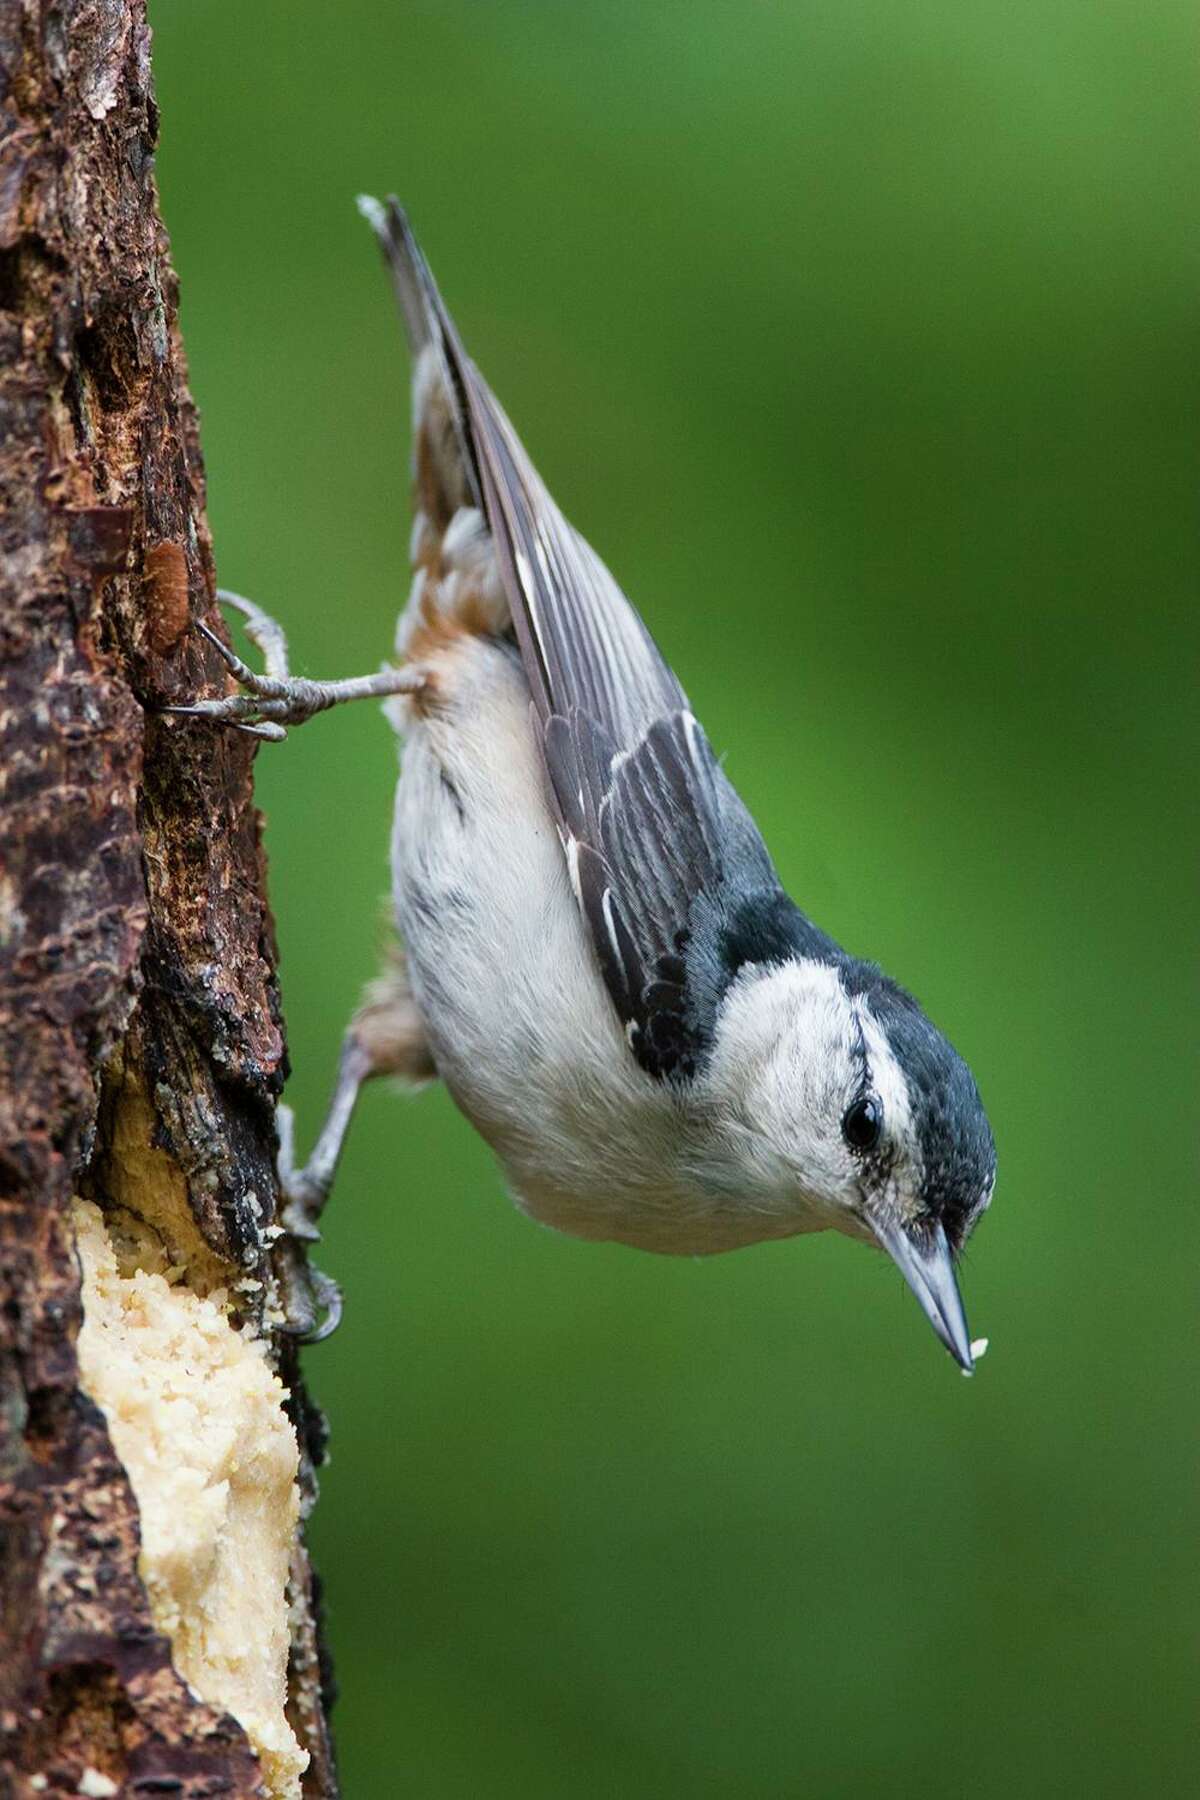 White-breasted nuthatch feed on insects in the crevices of tree bark and are also attracted to backyard feeders filled with peanut butter suet.